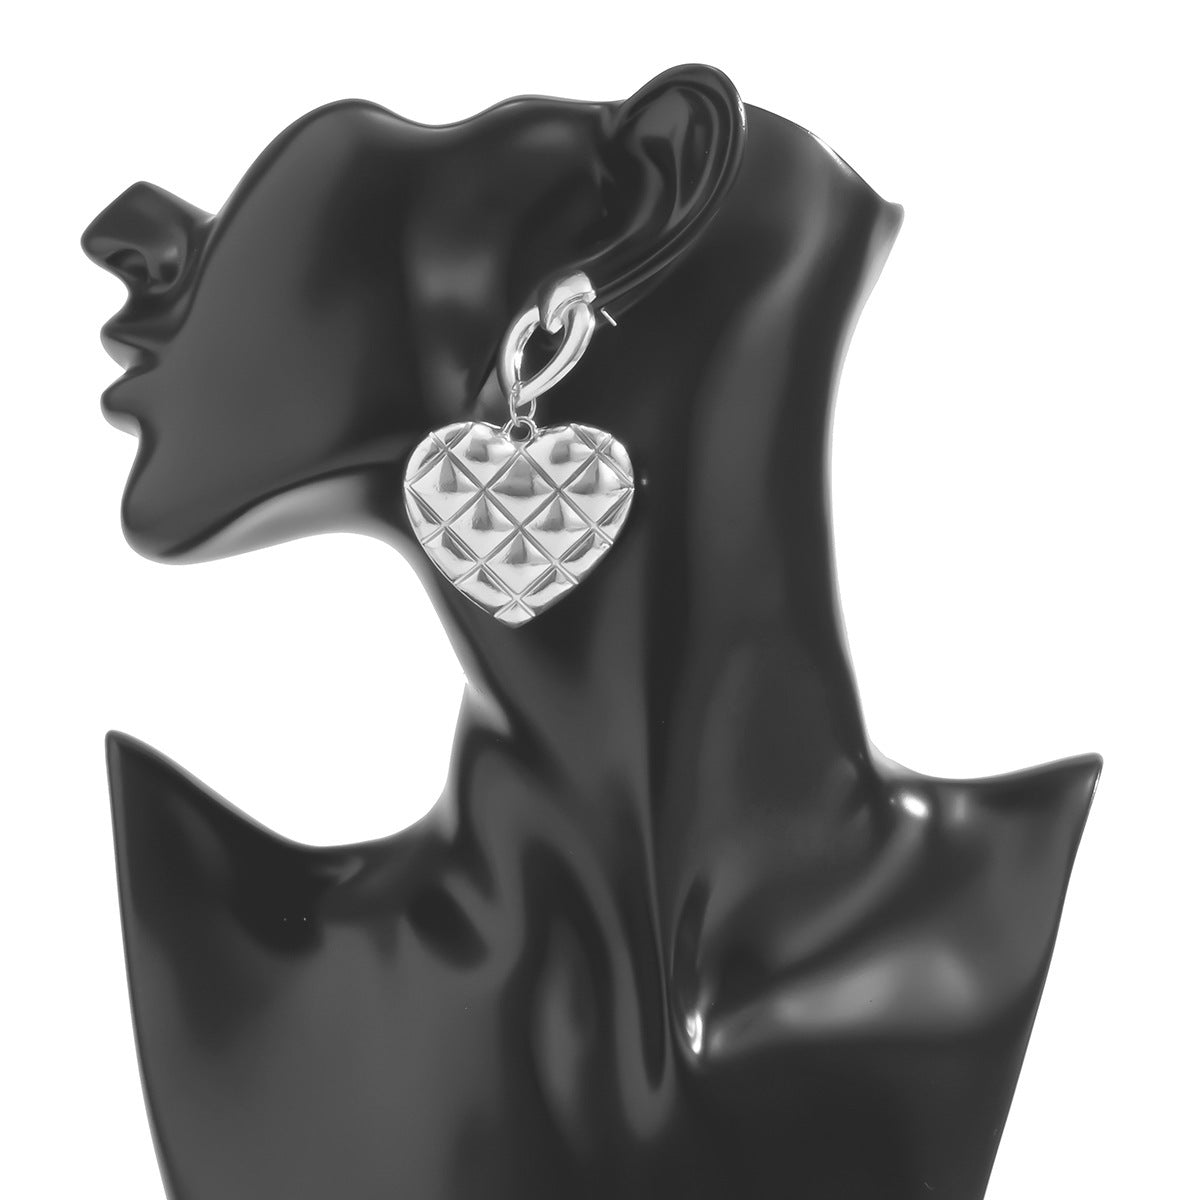 Fashionable Vienna Verve Alloy Earrings with Metal Needles and Simple Three-dimensional Heart-shaped Design